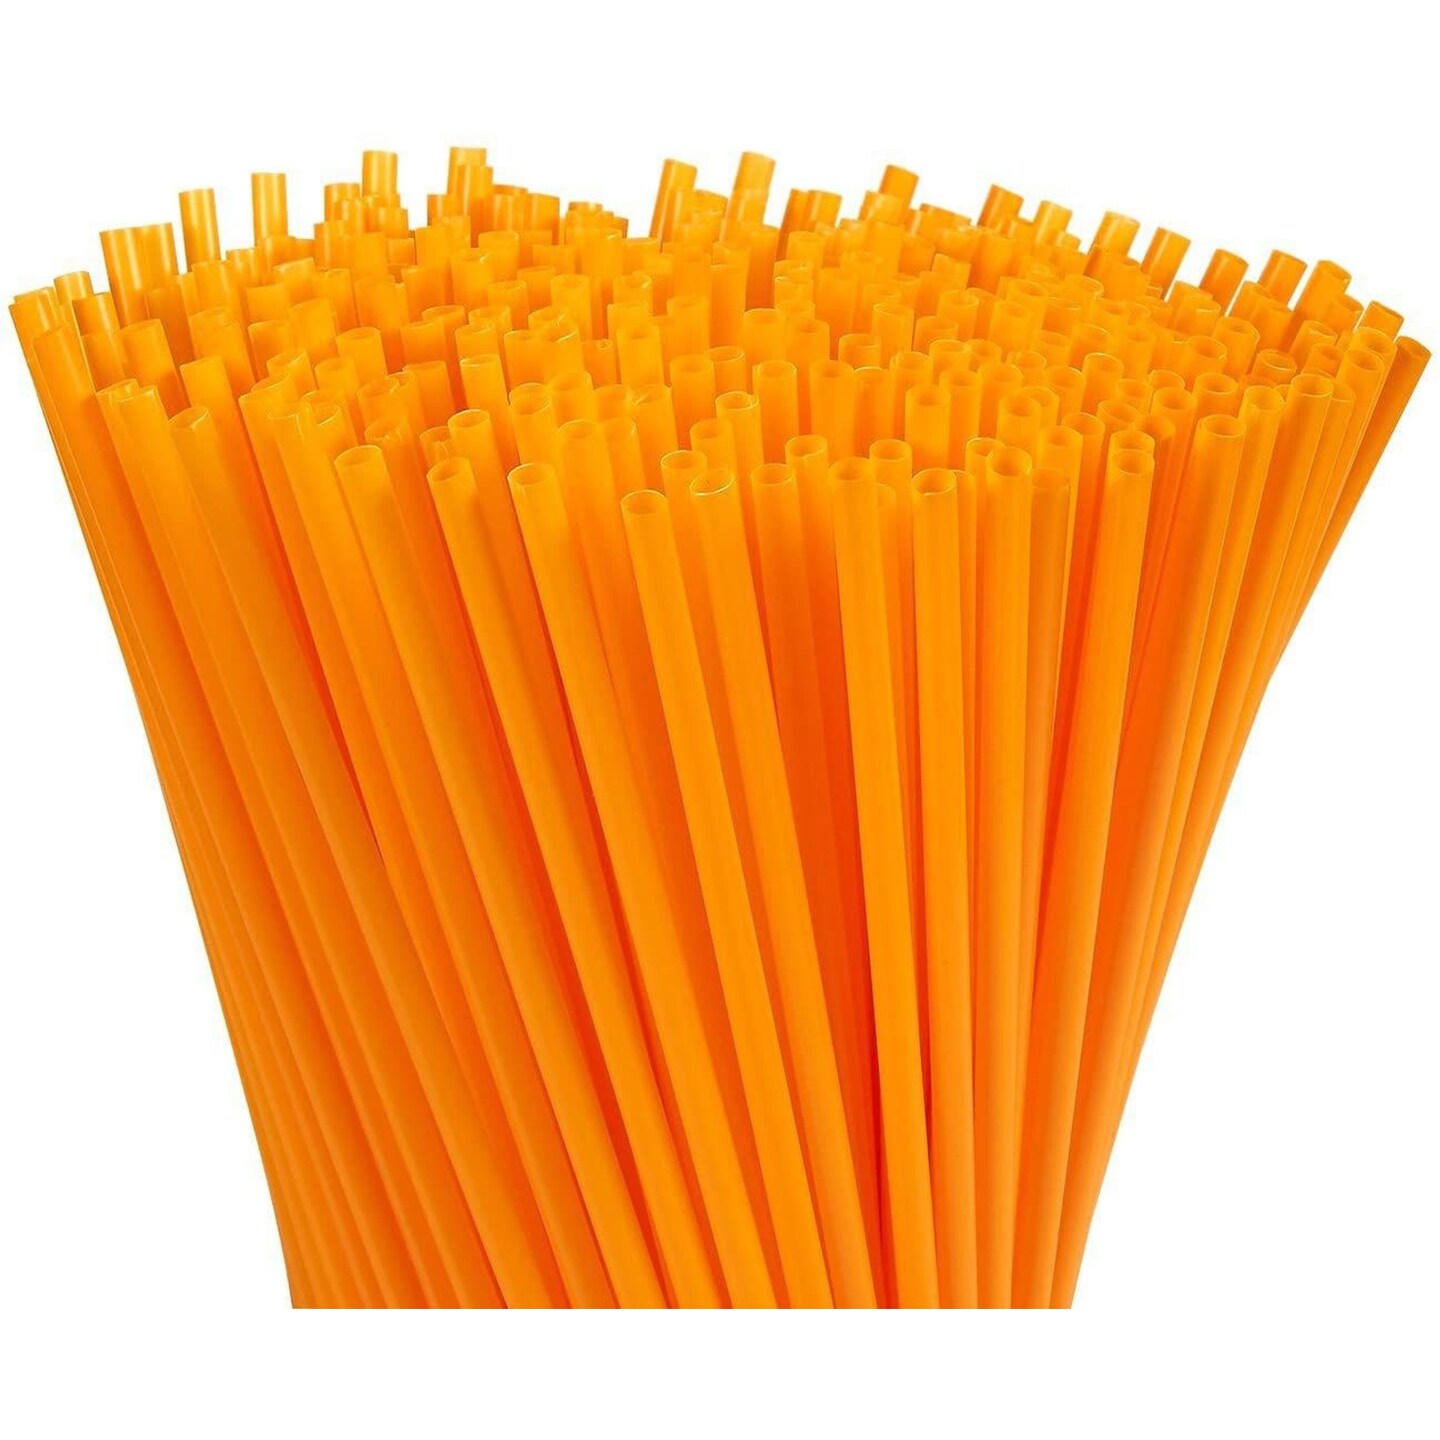 300 Pack Plastic Orange Disposable Party Drinking Straws, Extra Long Size, 10 In